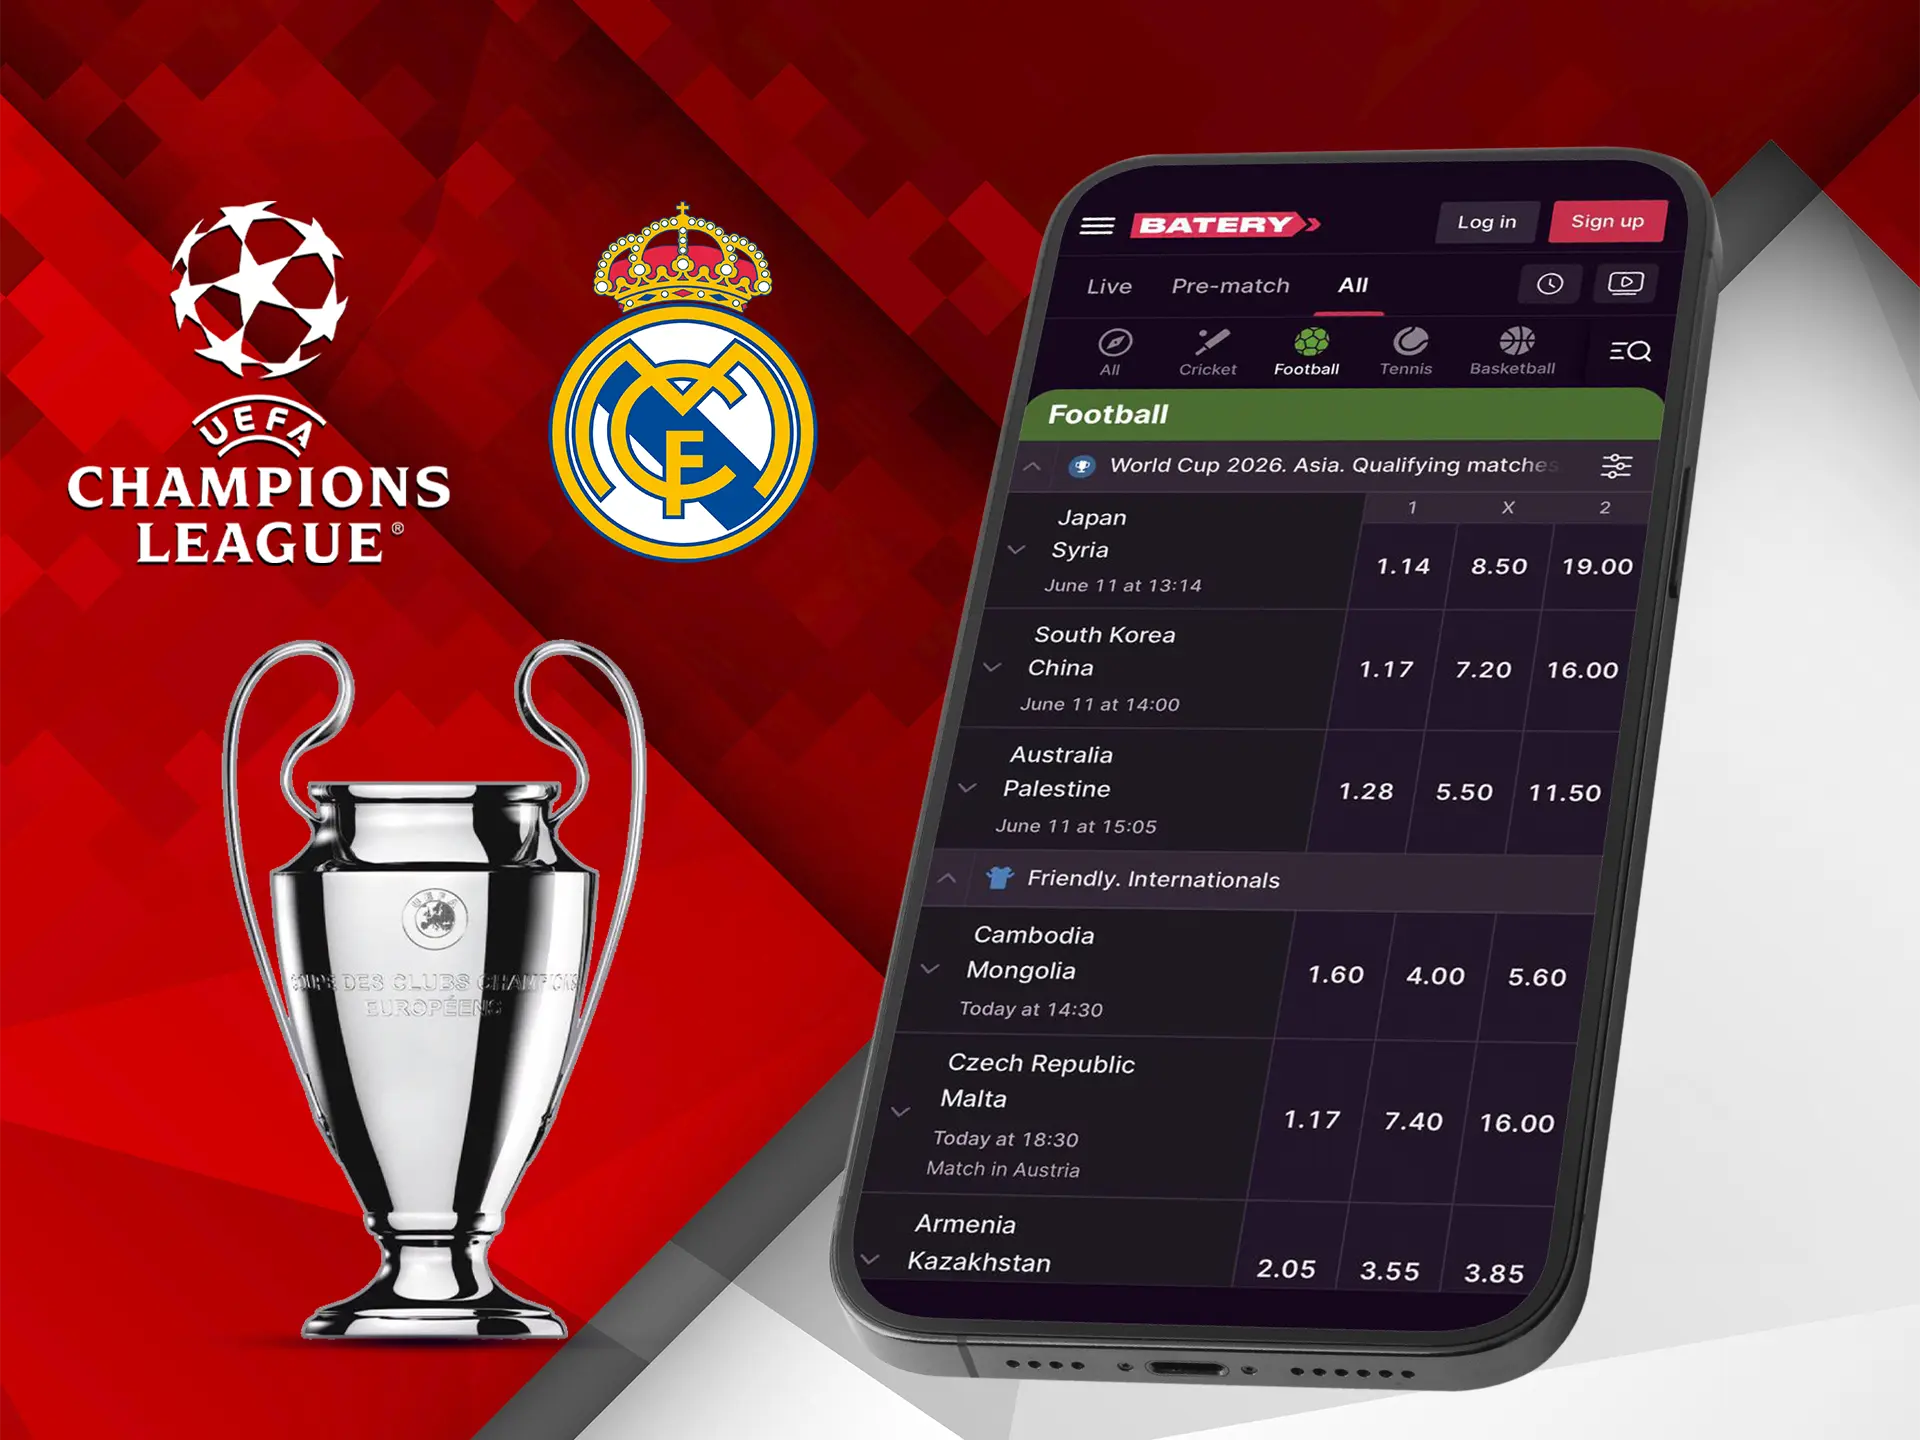 Watch and don't forget to make your predictions for the most prestigious tournament in football, the Champions League.